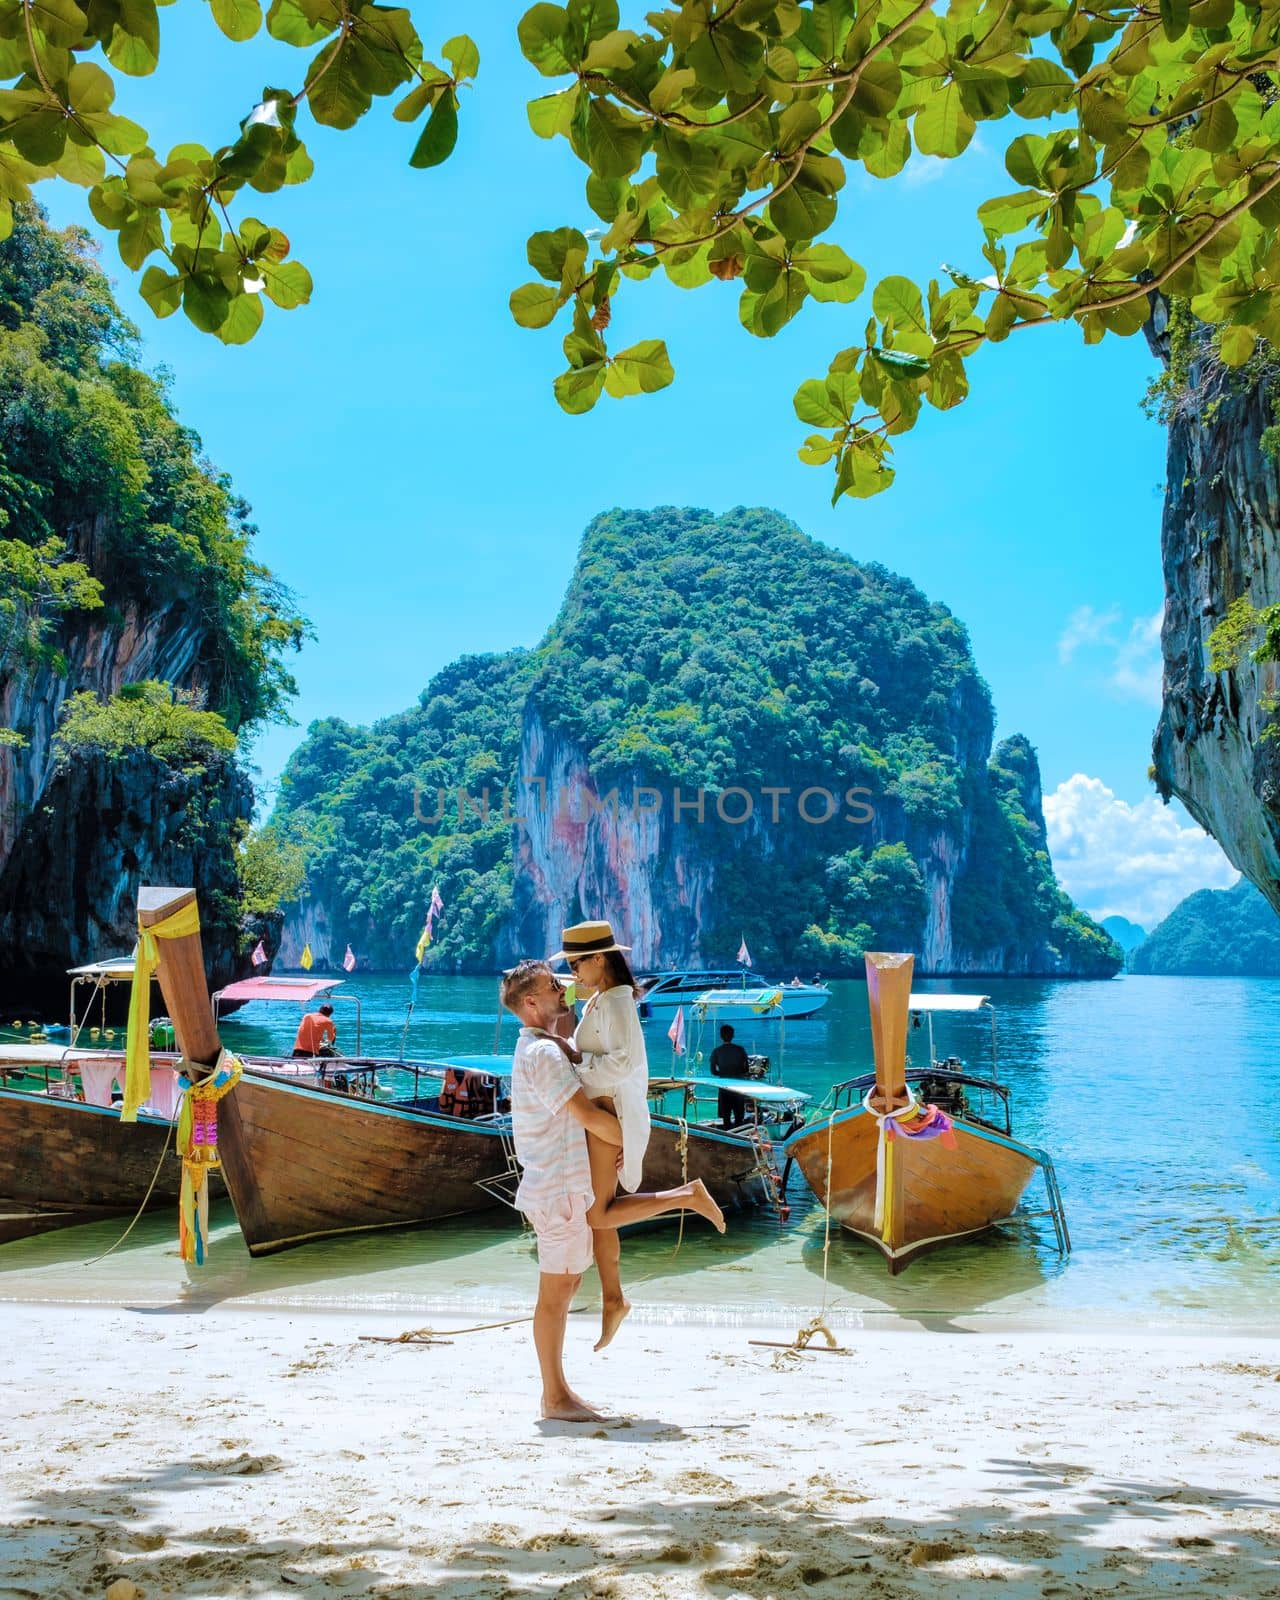 Koh Lao Lading near Koh Hong Krabi Thailand, a beautiful beach with longtail boats, a couple of European men, and an Asian woman on the beach. Couple on a boat trip